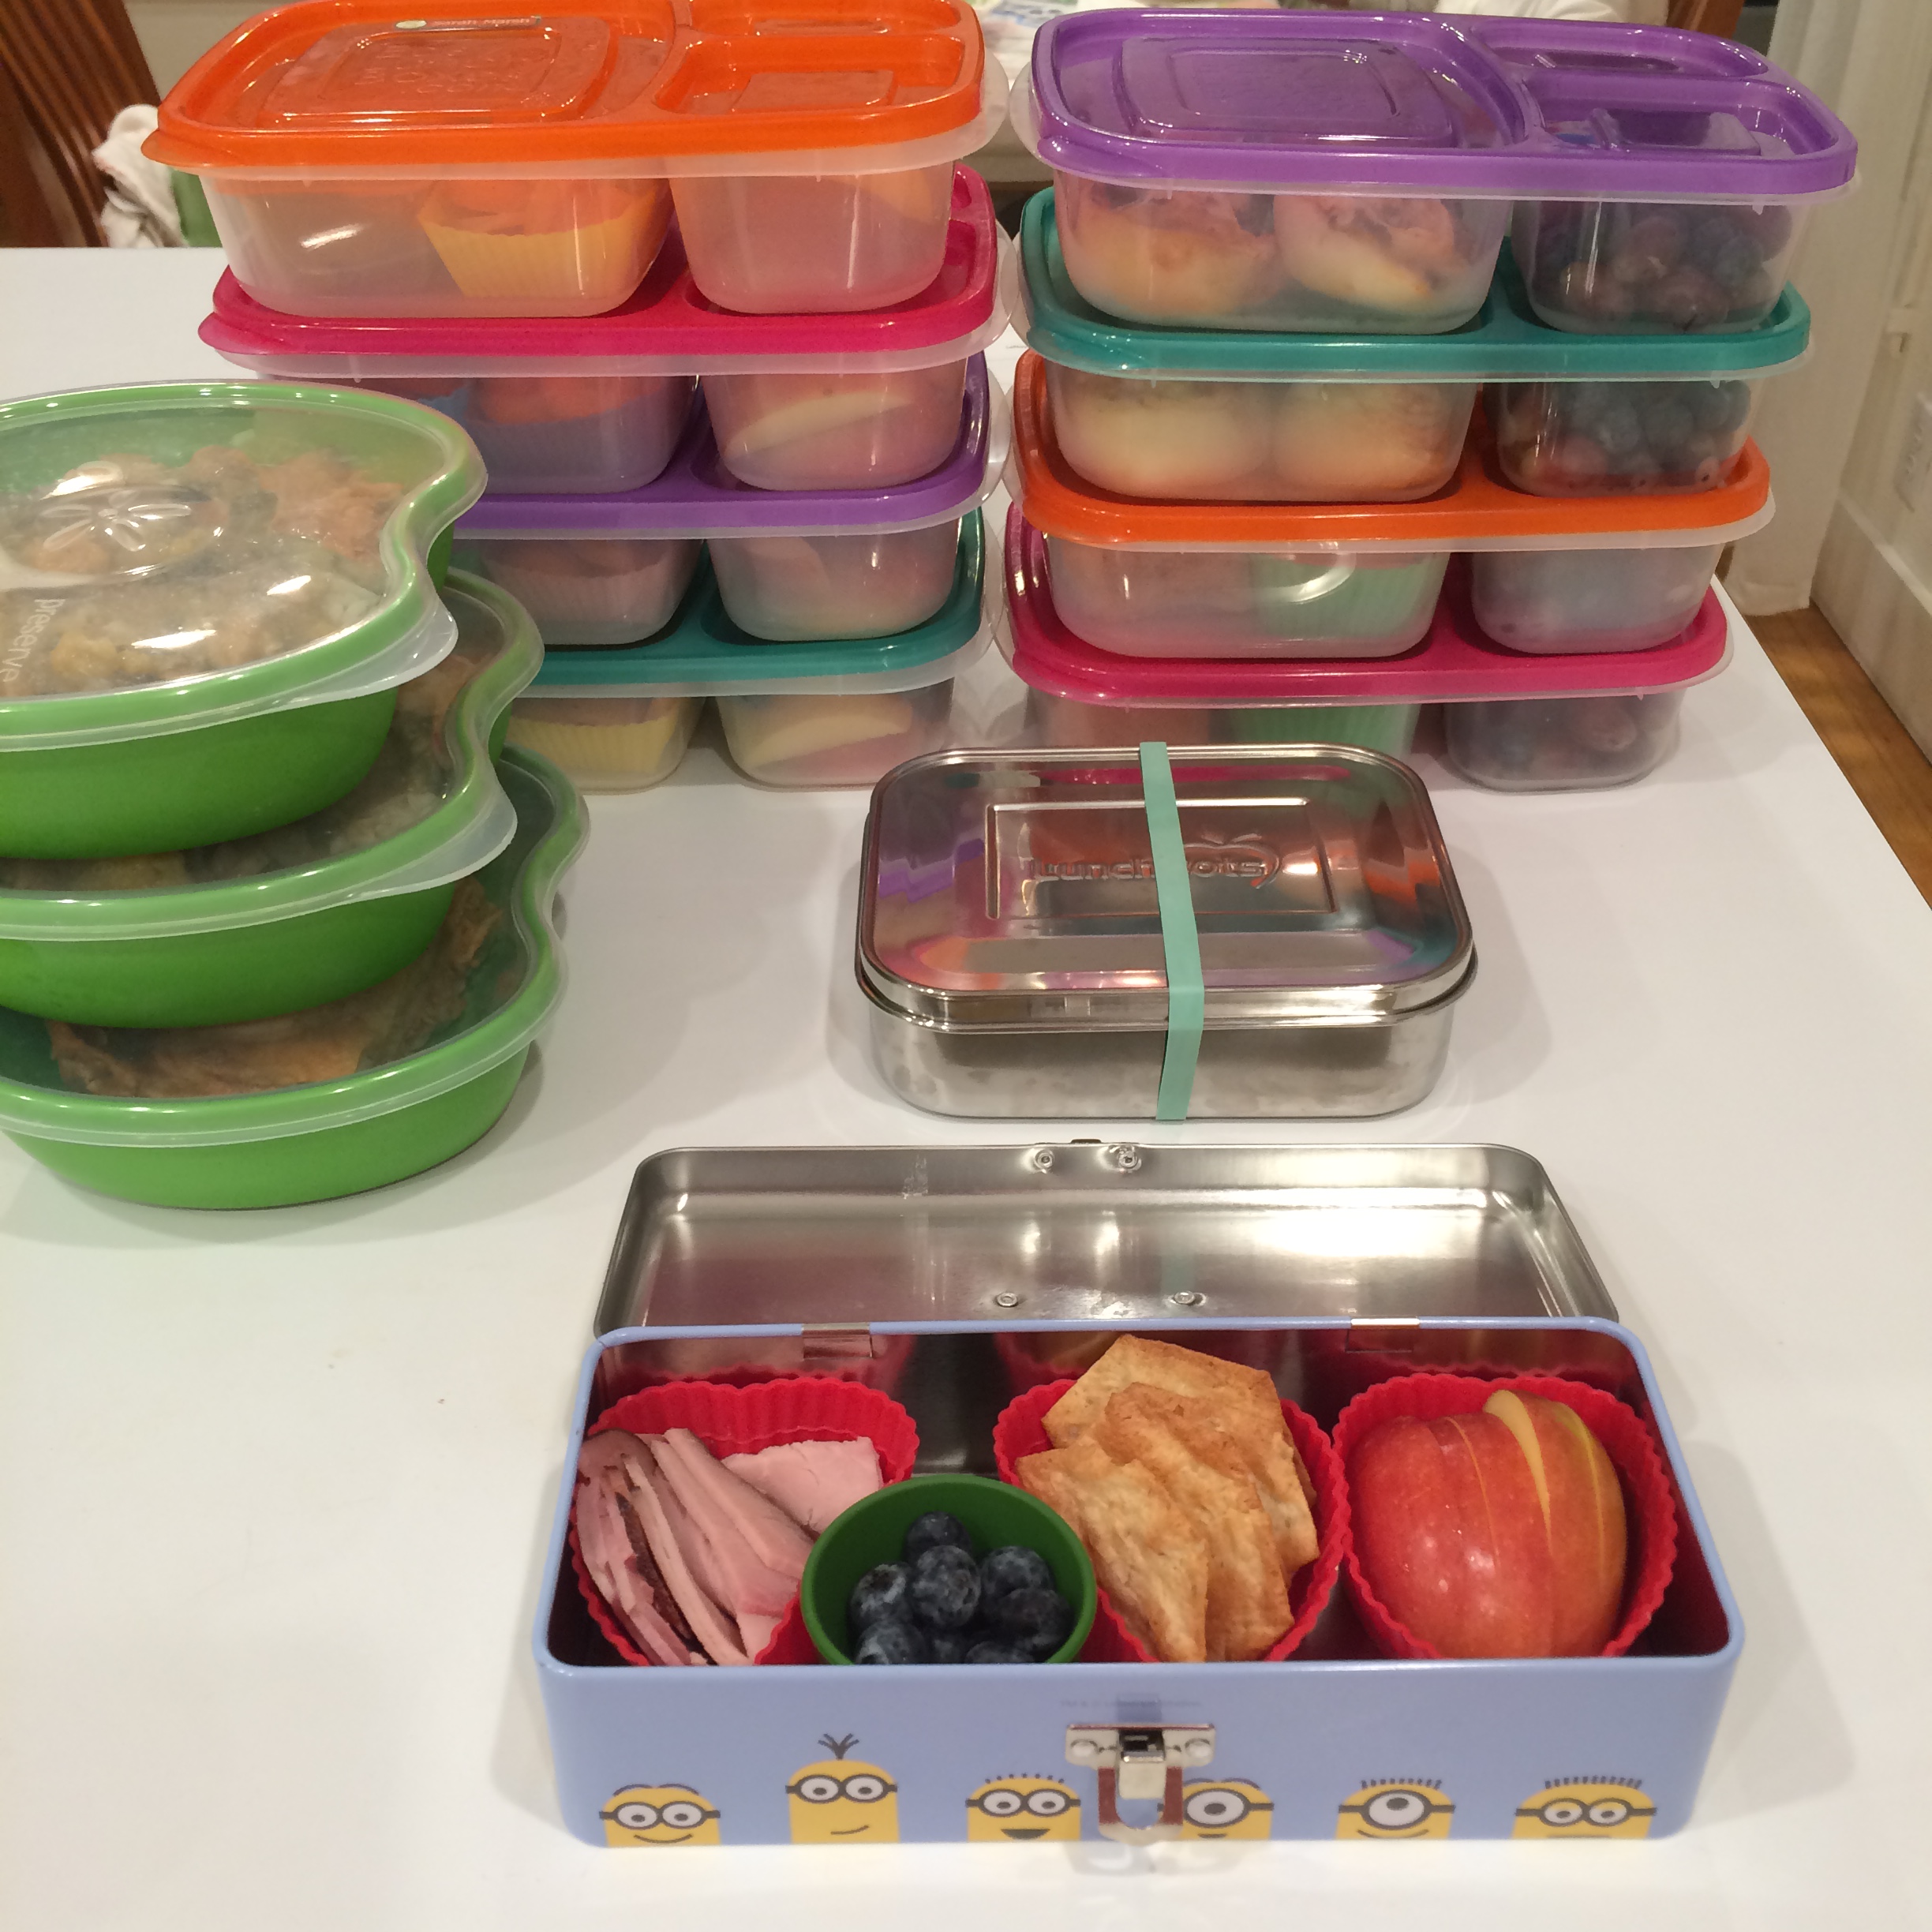 School lunch container tips & tricks – Heather's Handmade Life